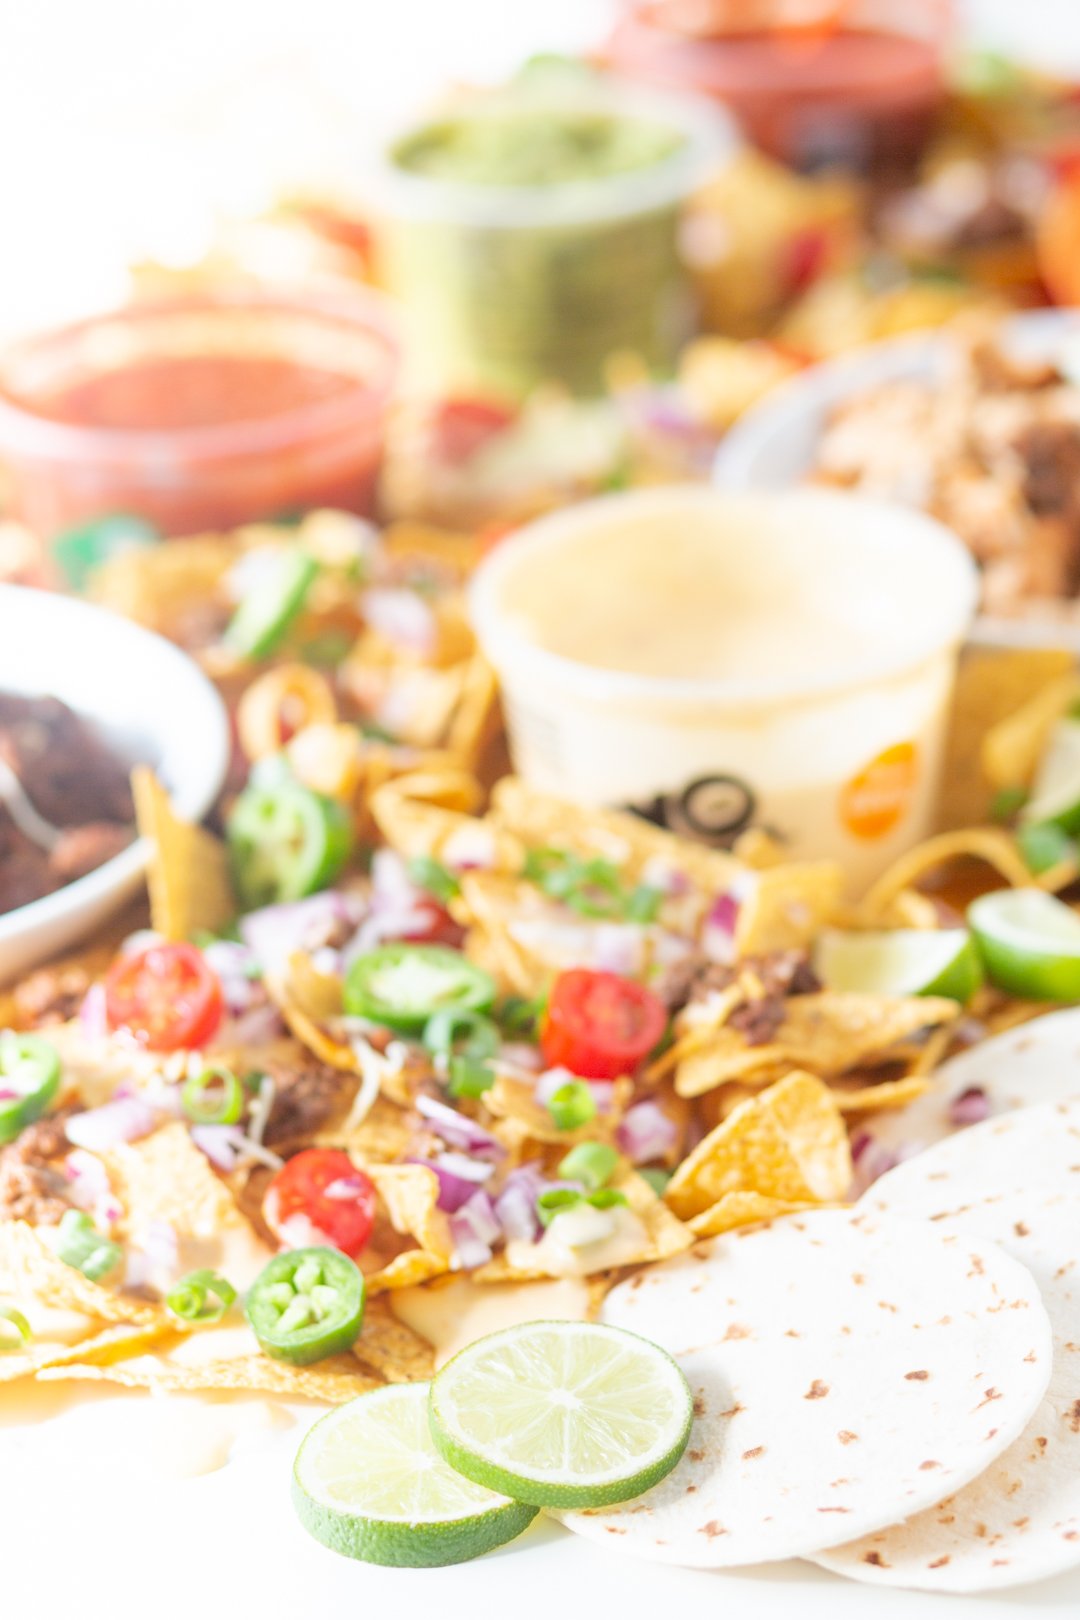 up close view of table nachos.  Tortilla chips loaded with fresh toppings.  Sliced ​​grape tomatoes, jalapeño slices, scallions, cheese.